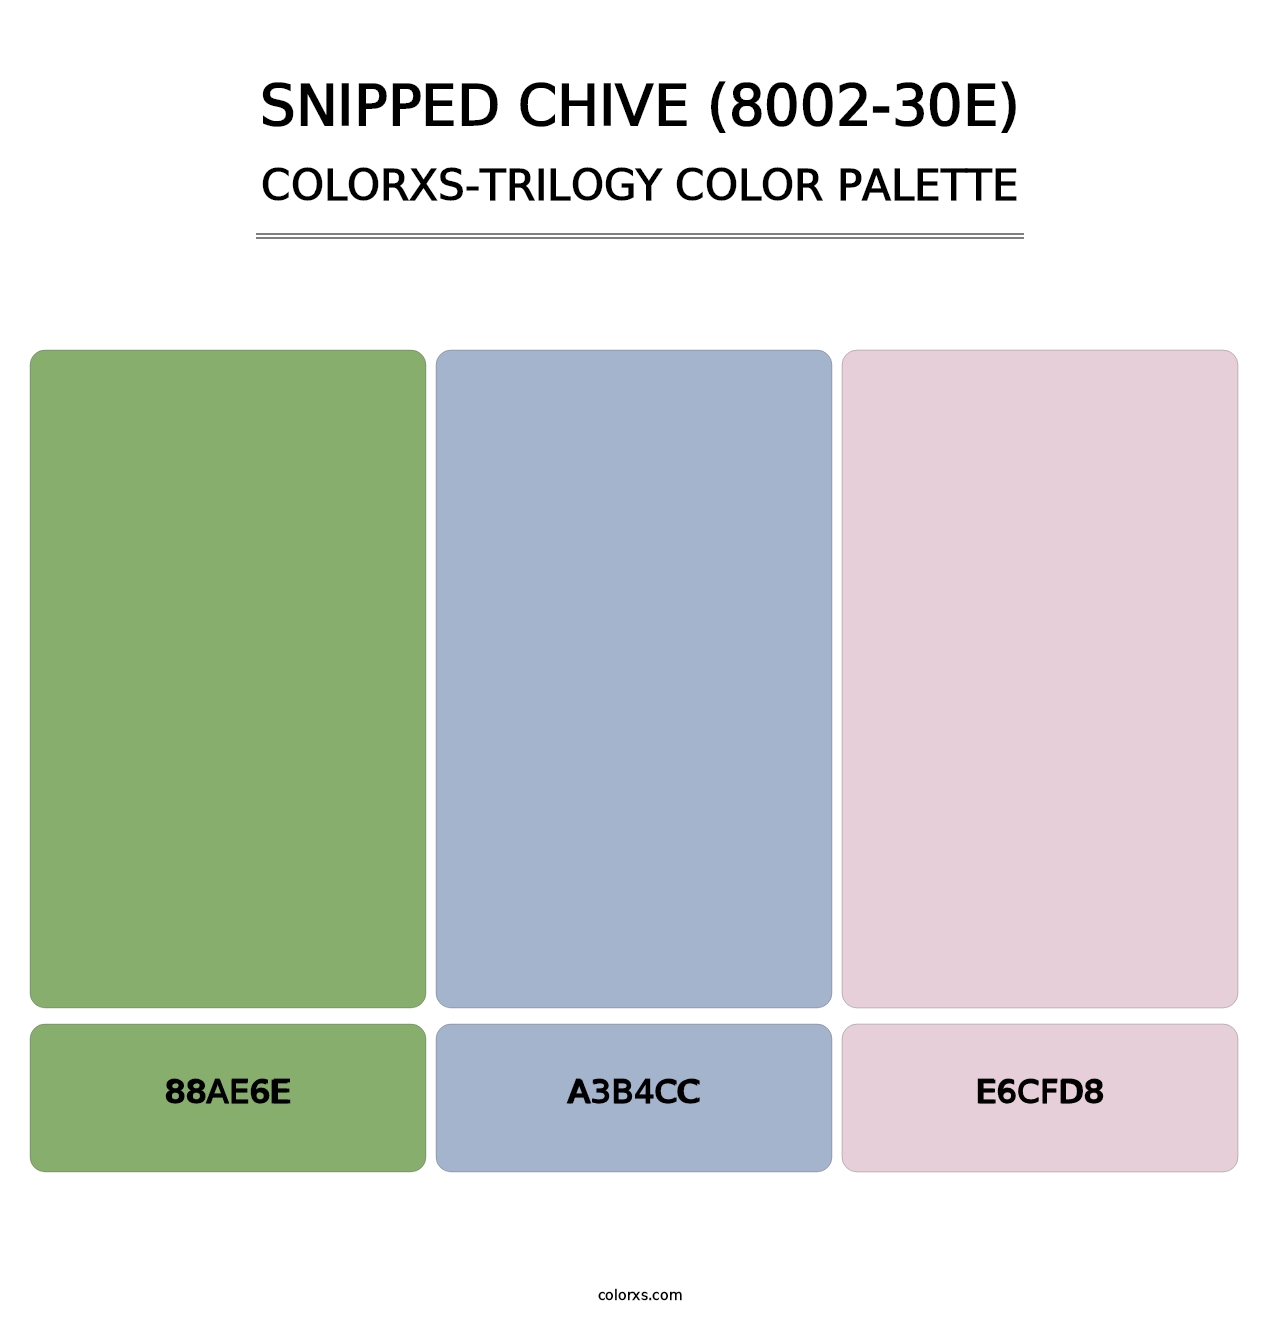 Snipped Chive (8002-30E) - Colorxs Trilogy Palette